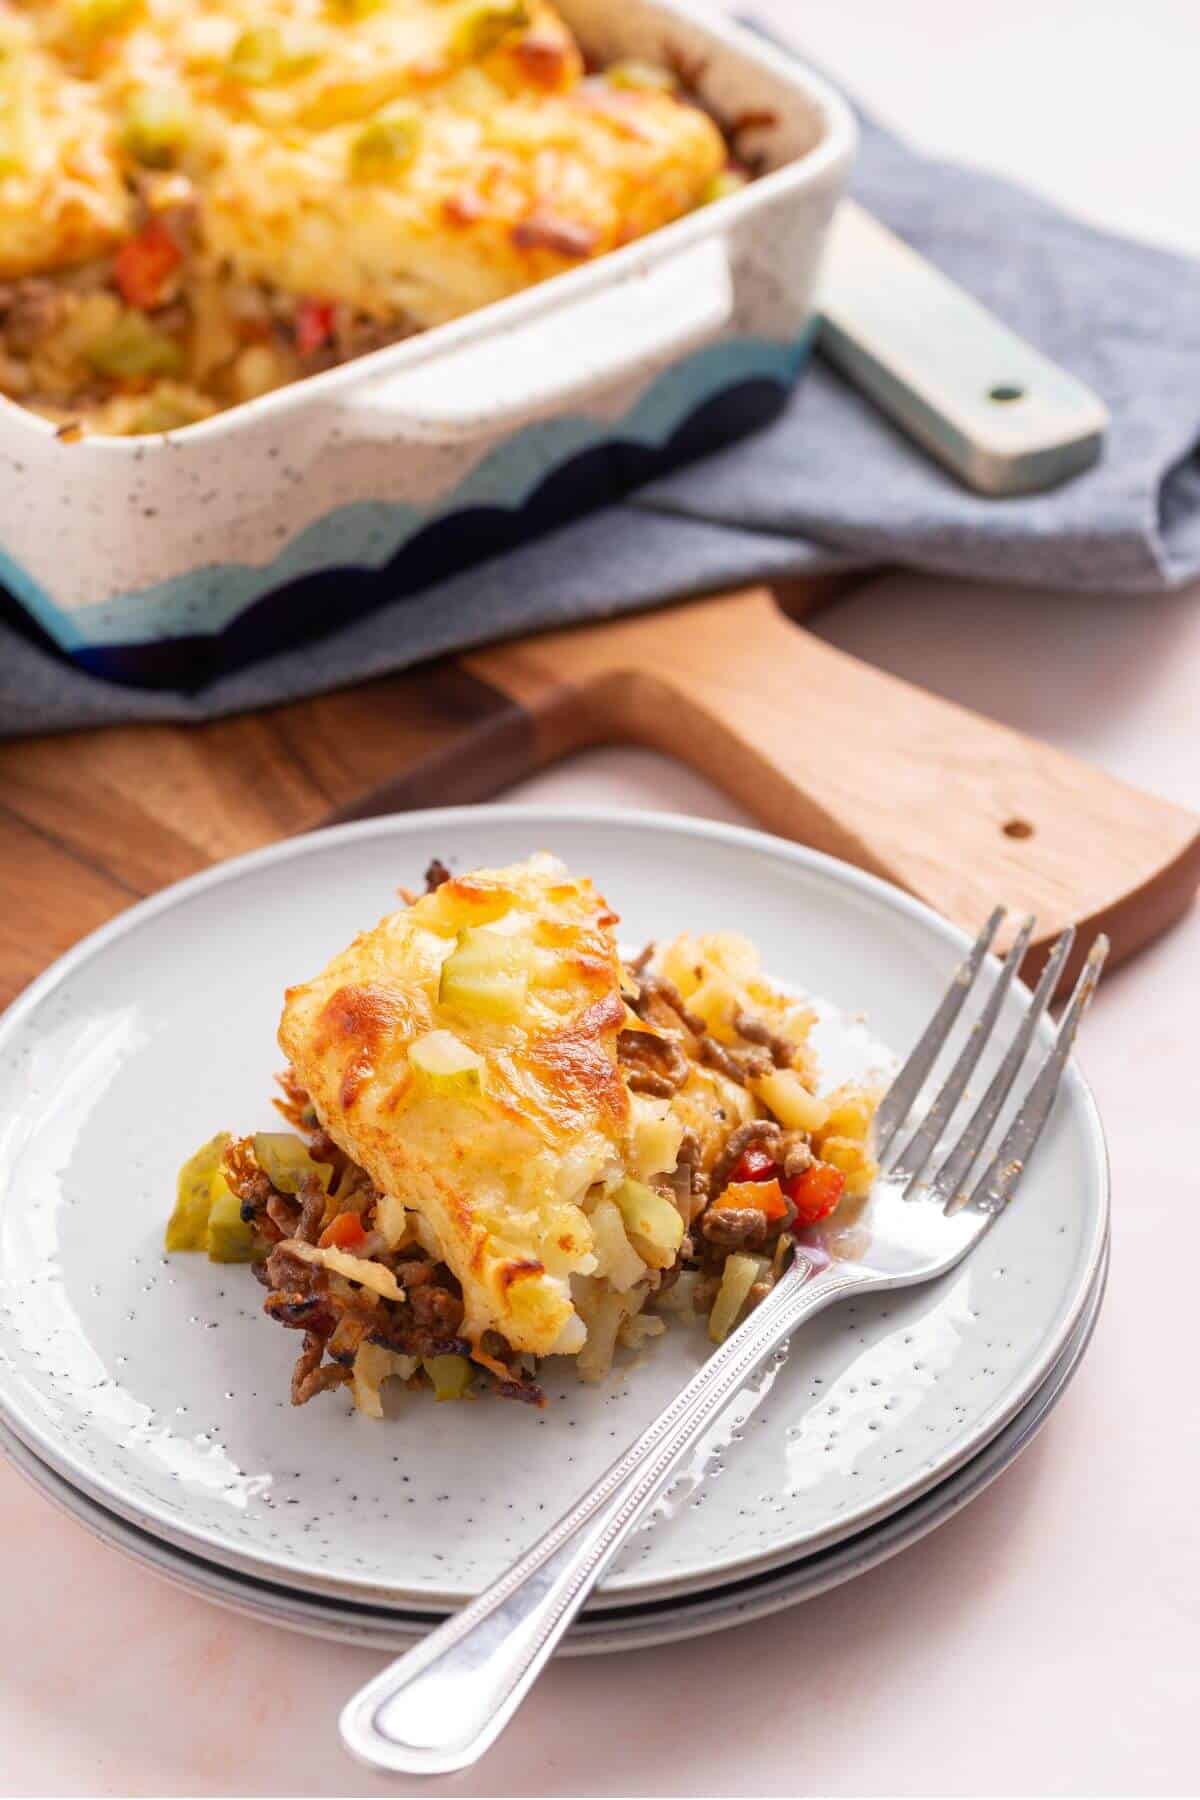 Sloppy joe casserole served on plate with pan in back.